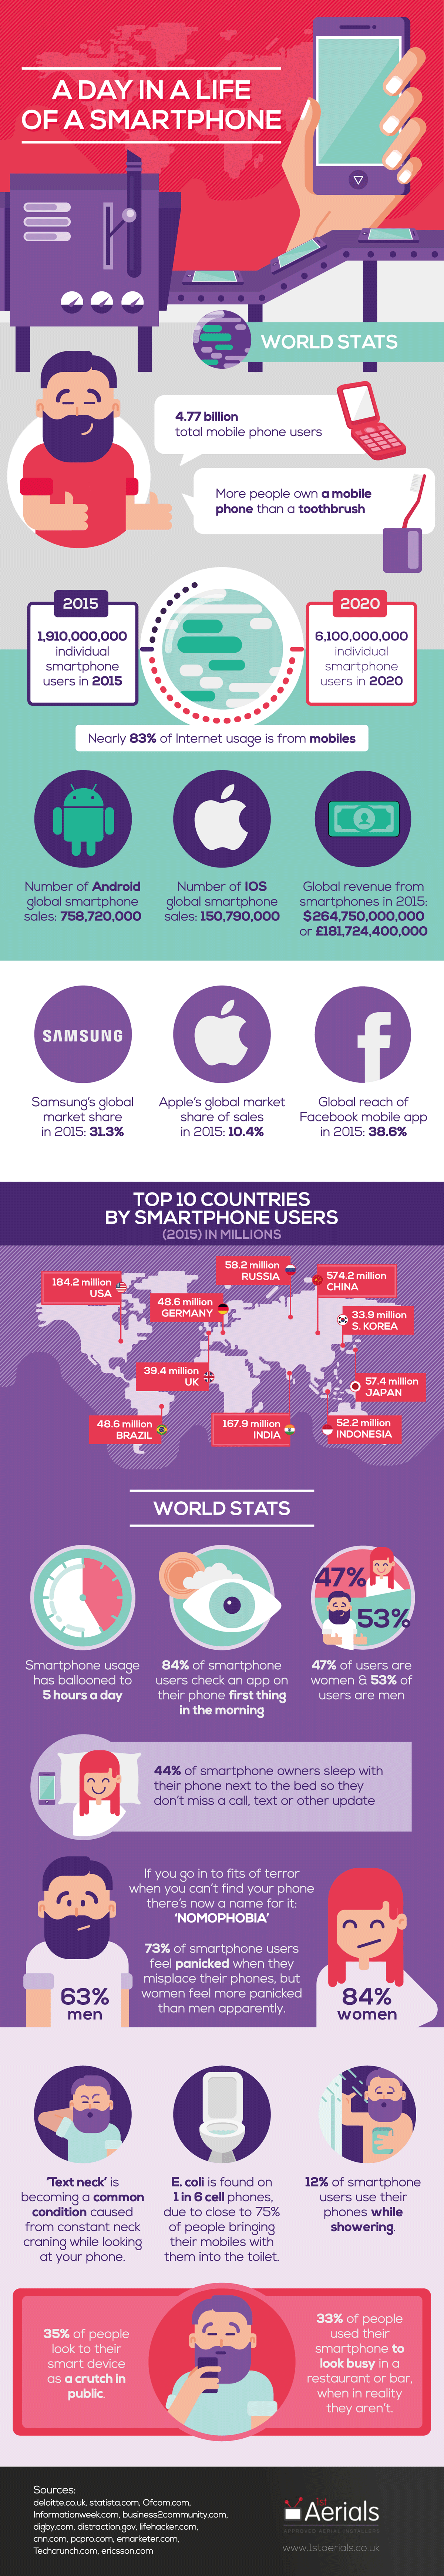 complete statistical information on the usage of smartphones